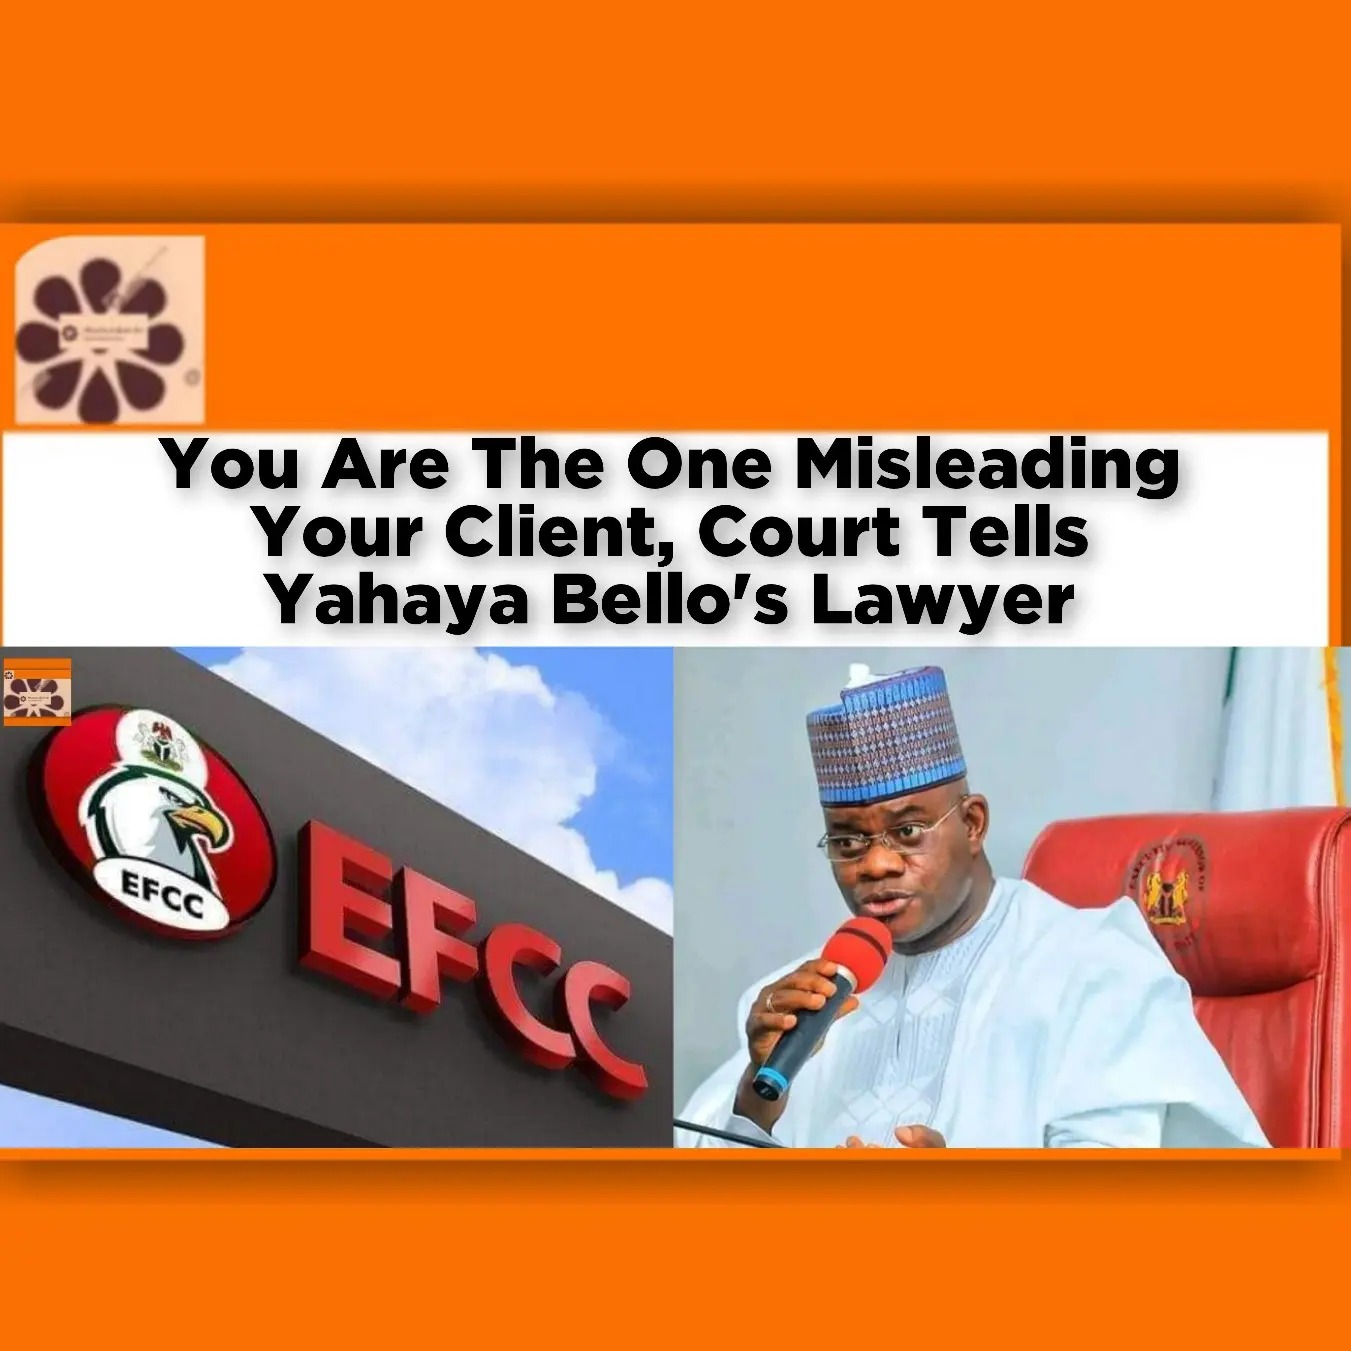 You Are The One Misleading Your Client, Court Tells Yahaya Bello's Lawyer ~ OsazuwaAkonedo Health